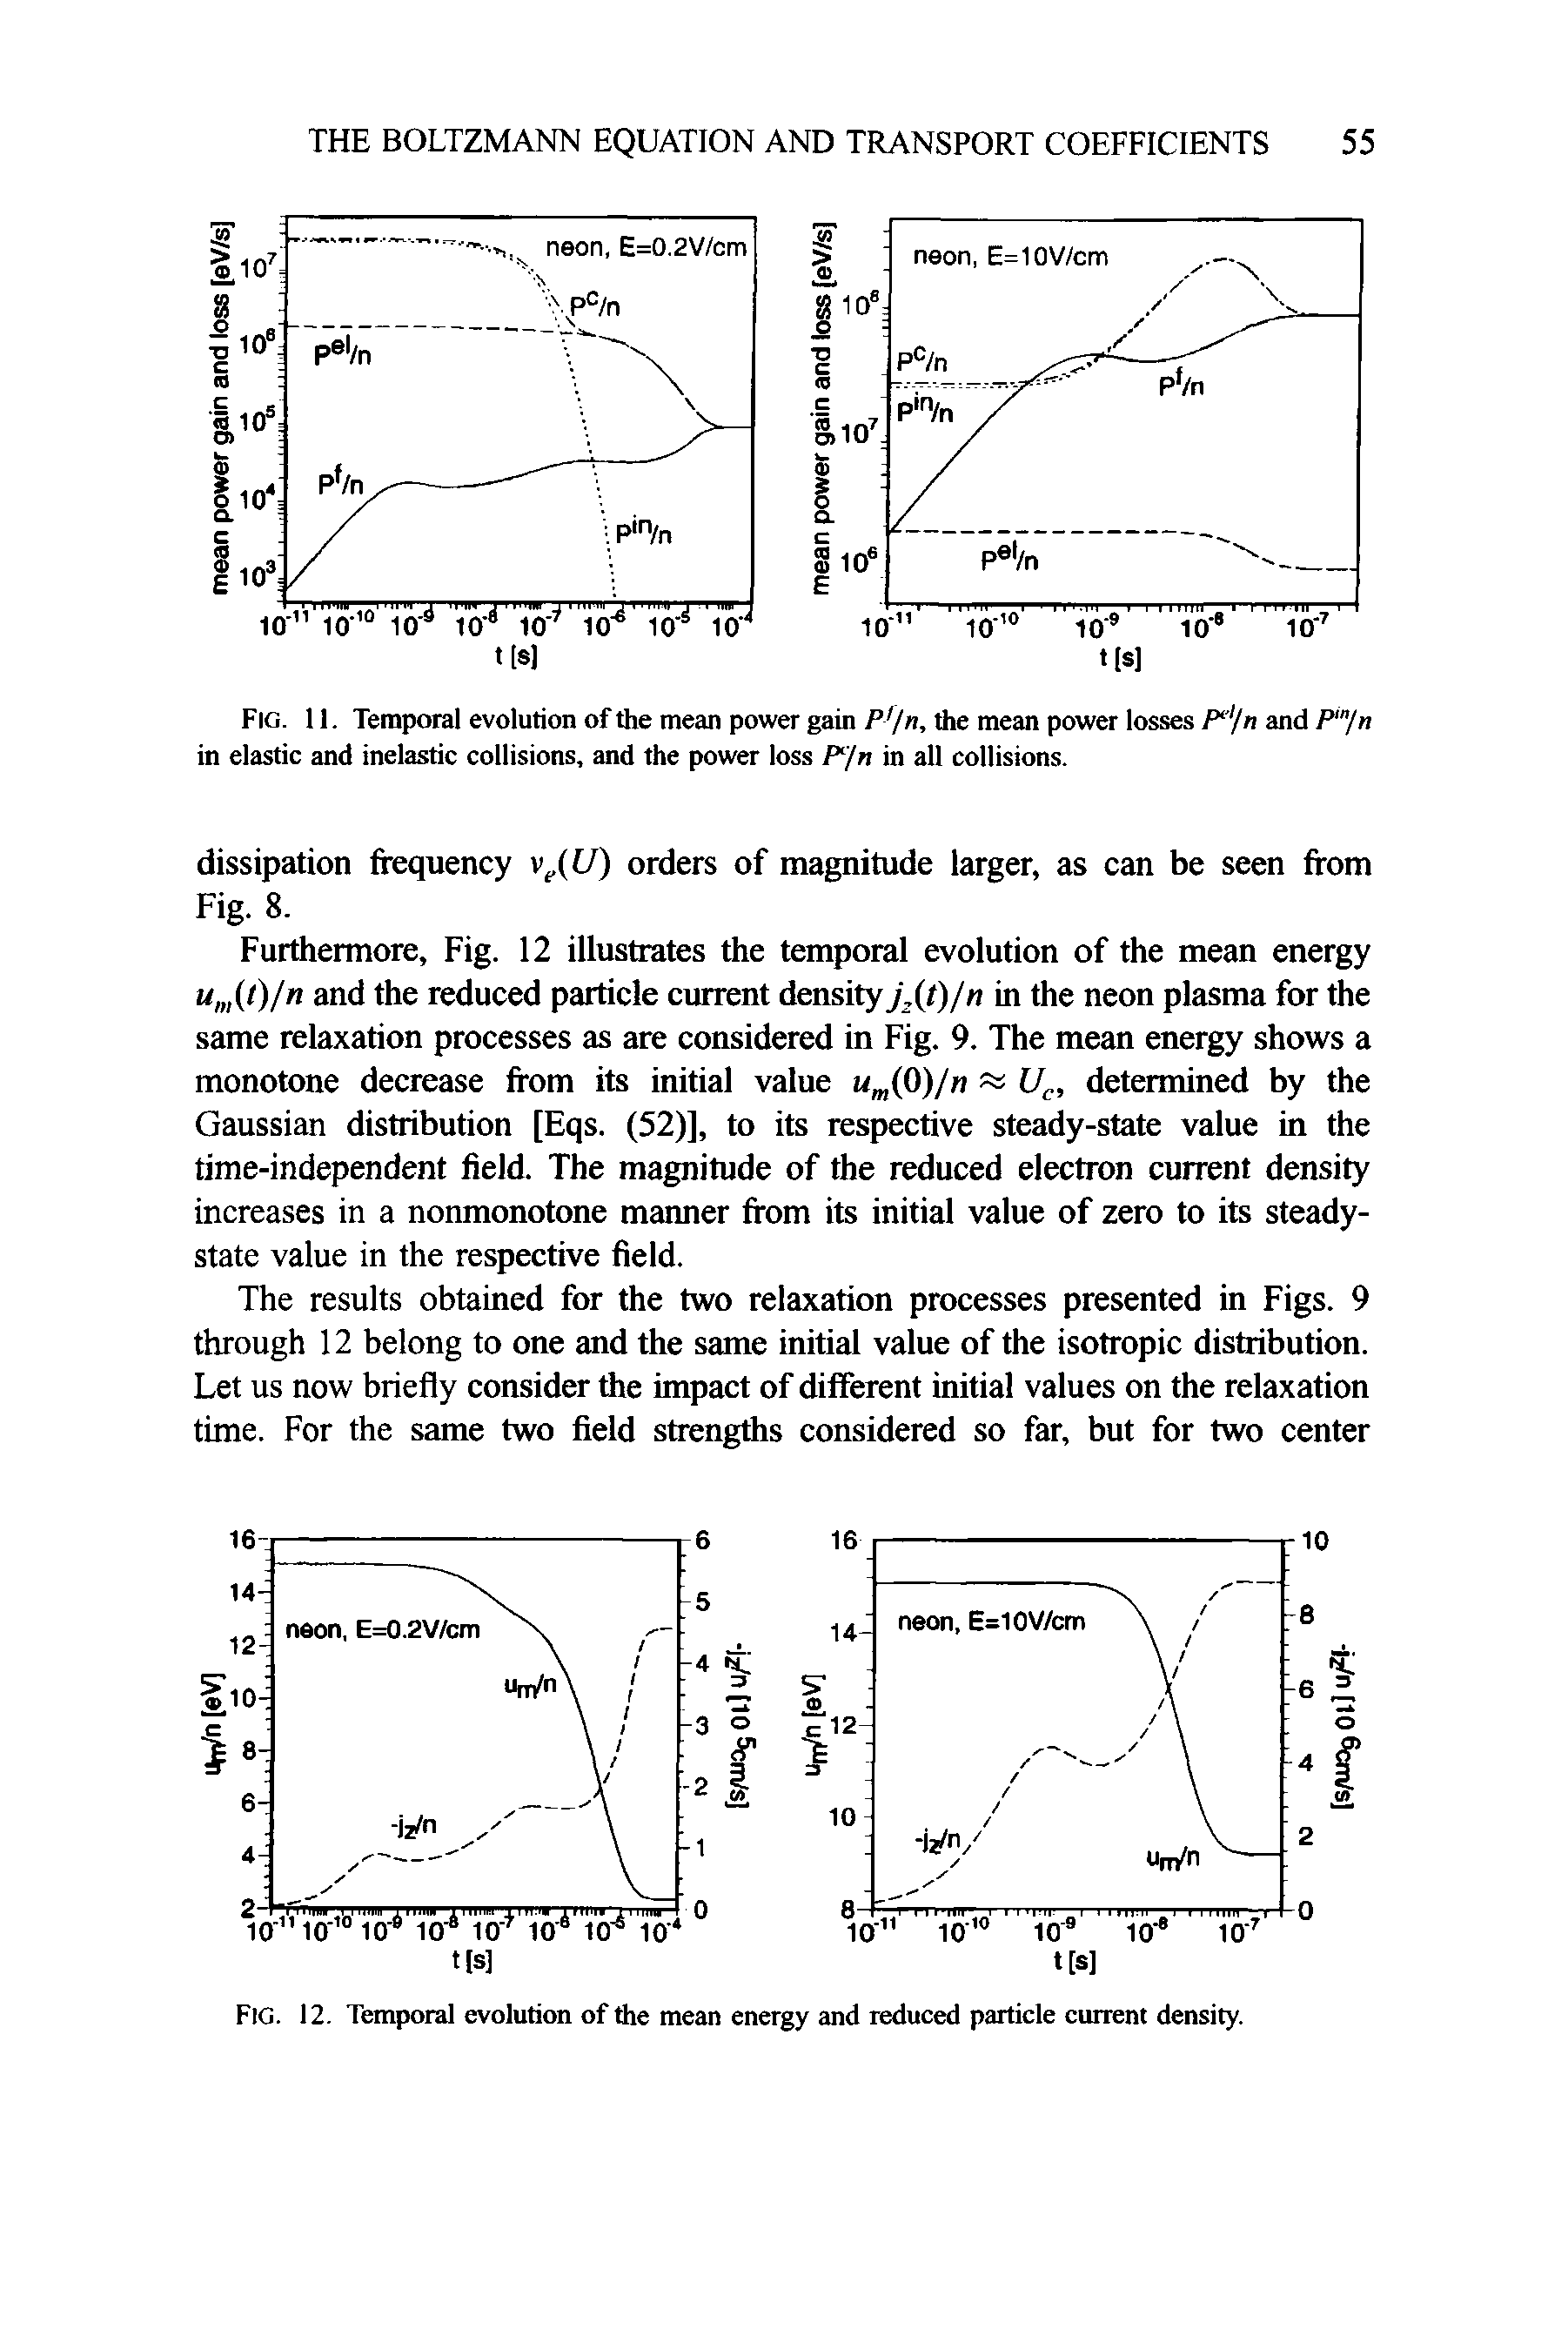 Fig. 11. Temporal evolution of the mean power gain P /n, the mean power losses P /n and P "ln in elastic and inelastic collisions, and the power loss P /n in all collisions.